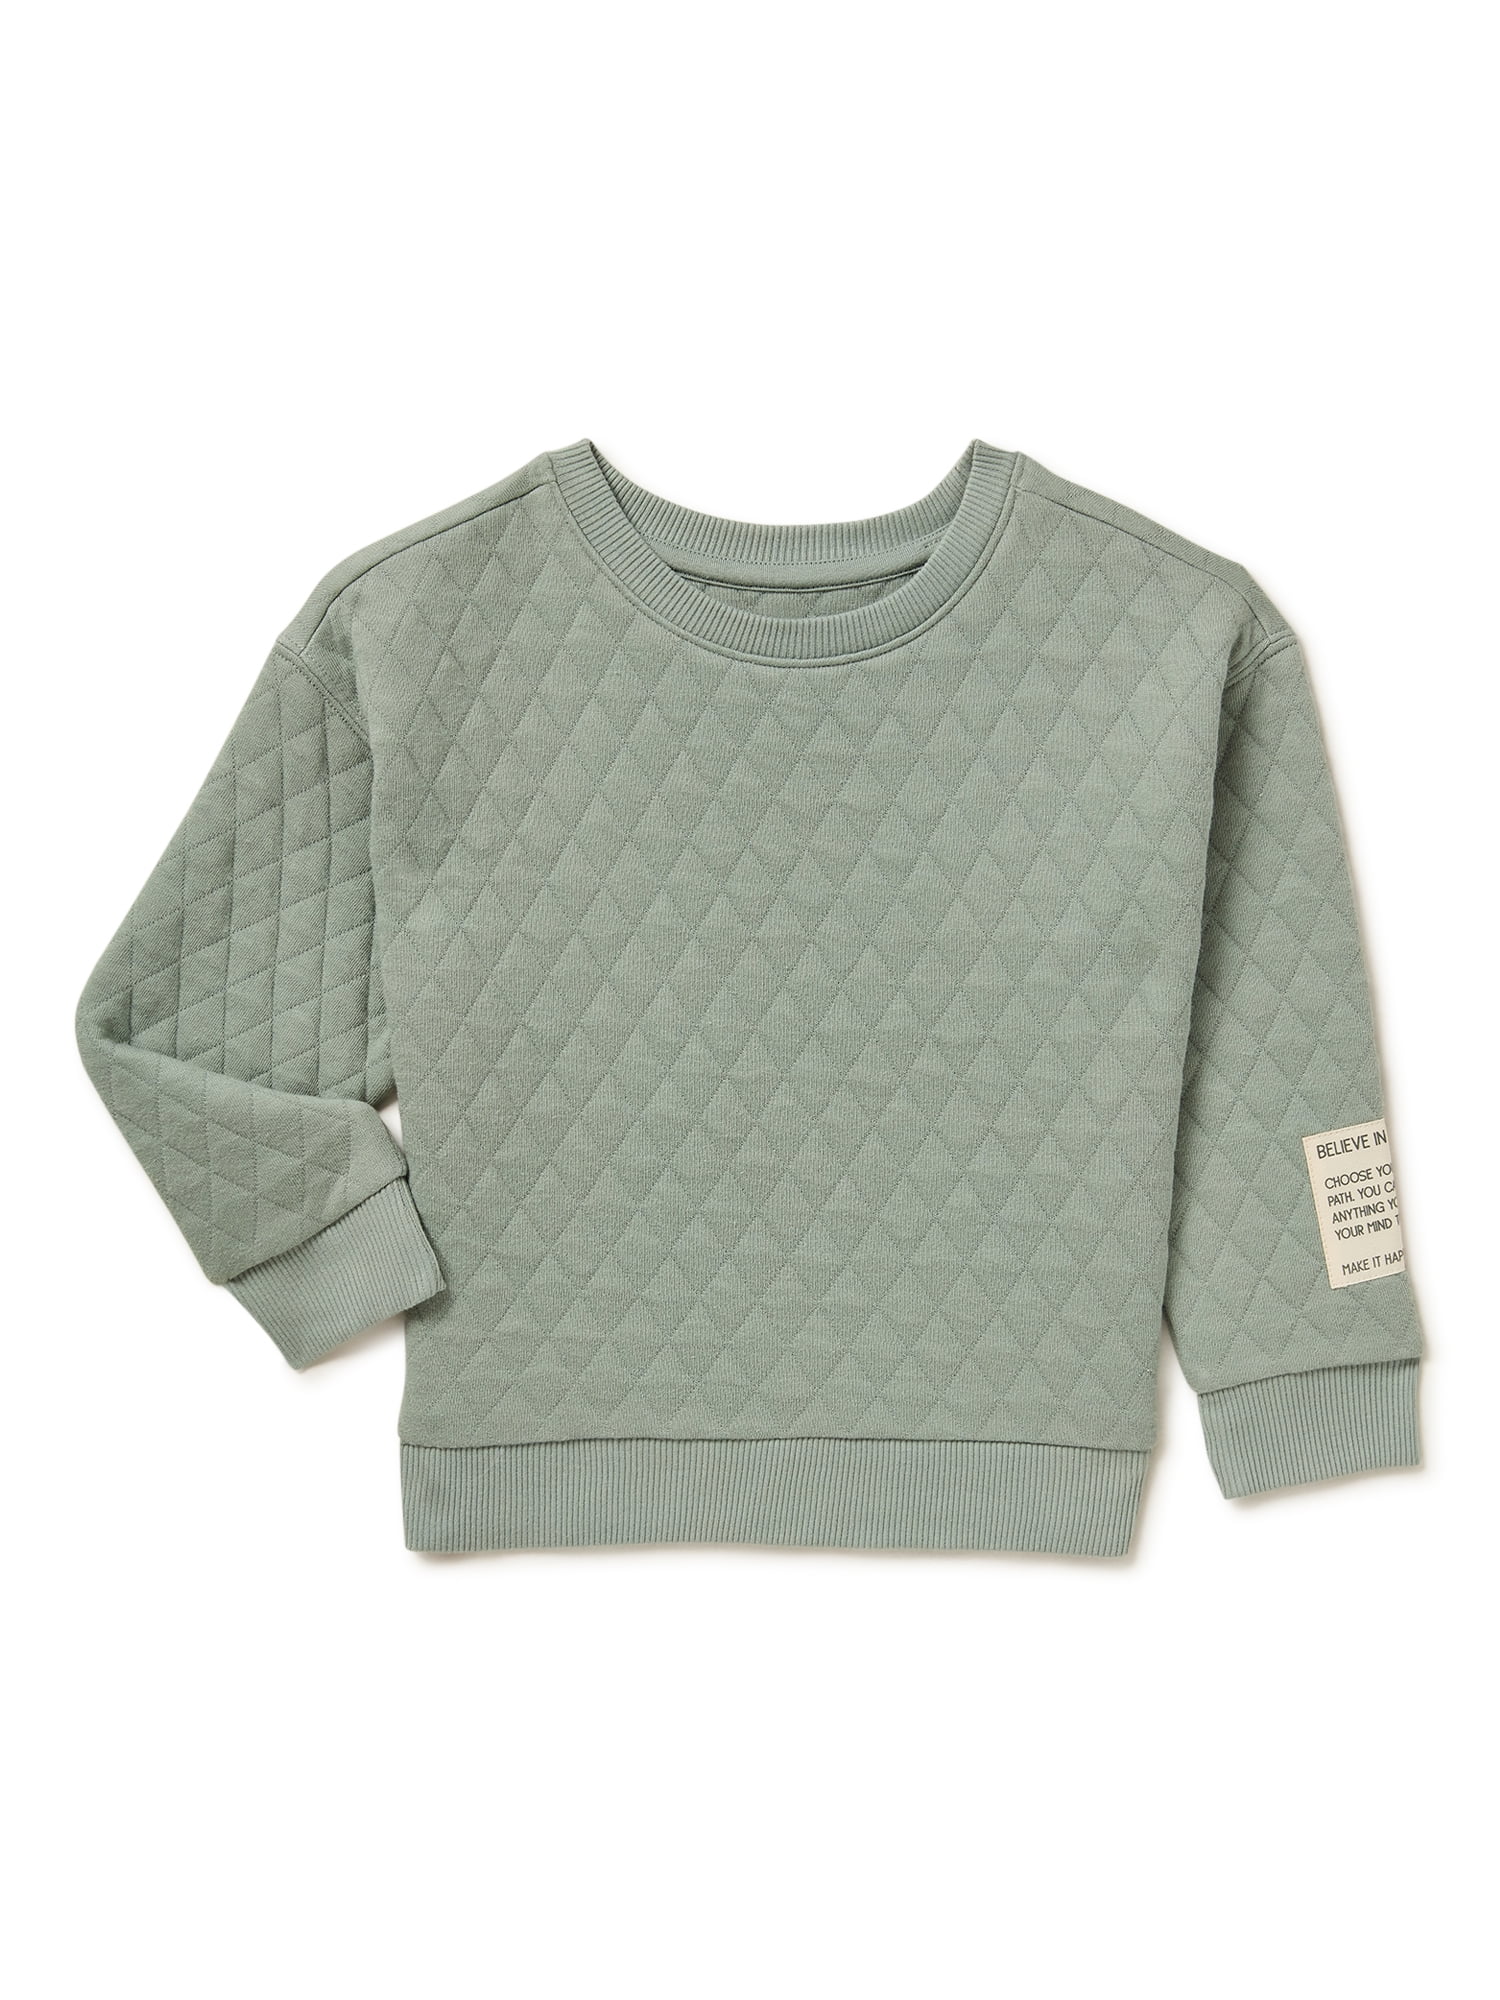 easy-peasy Baby and Toddler Girls Quilted Sweatshirt, Sizes 12